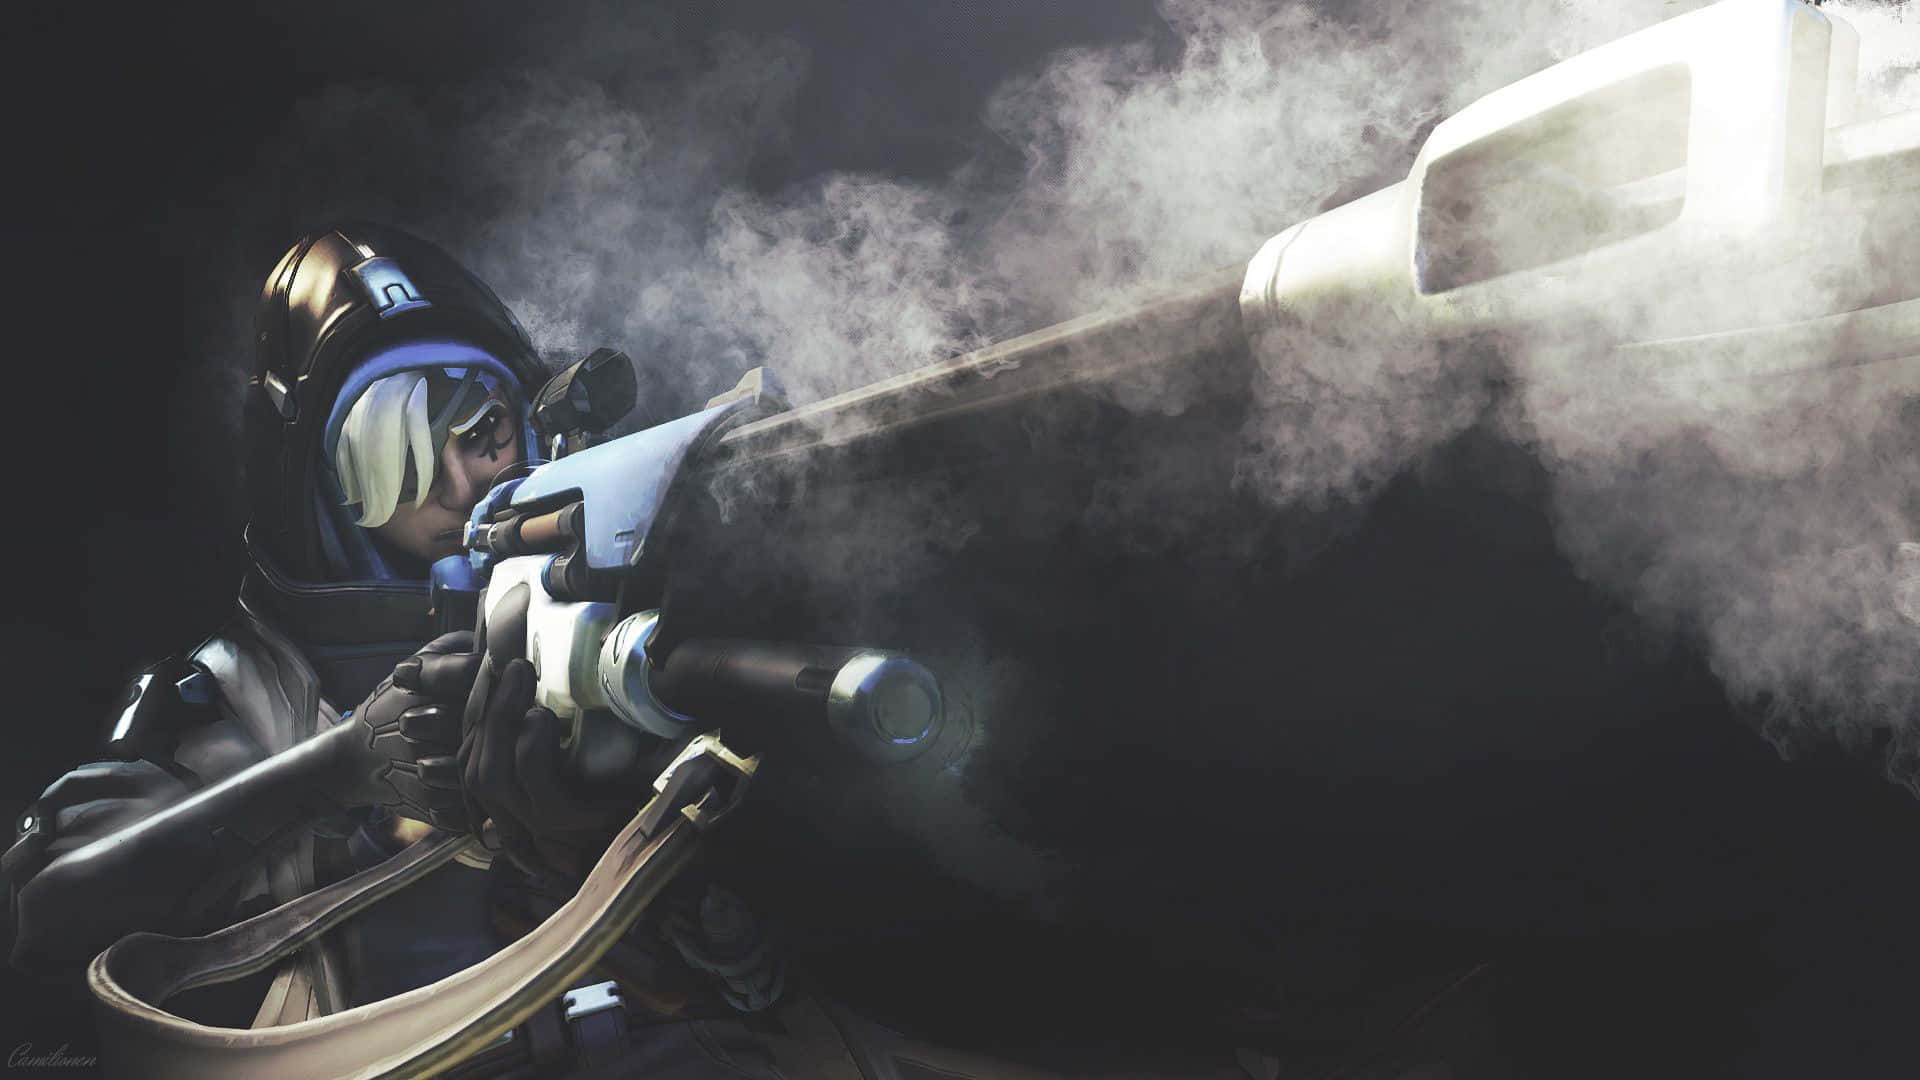 Sharpshooter Ana takes aim in Overwatch Wallpaper